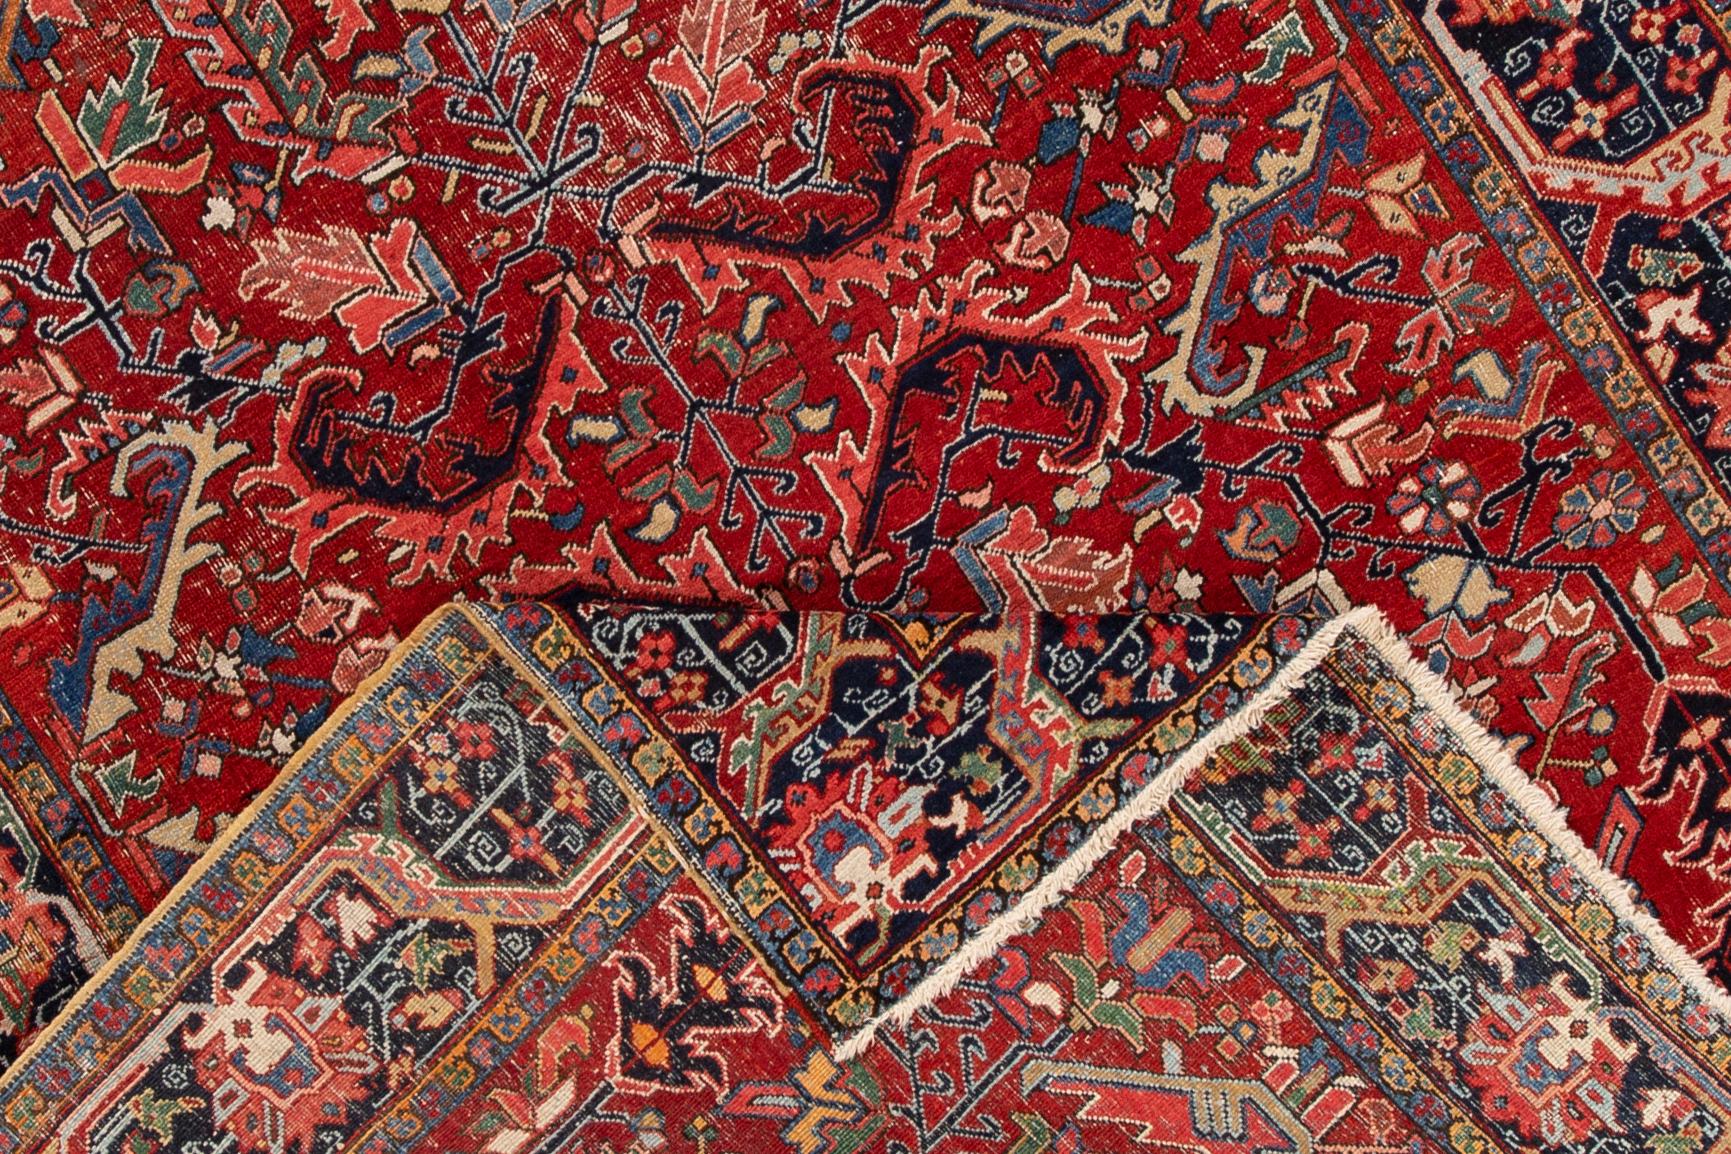 Beautiful hand knotted antique Heriz wool rug with a red field. This rug has a black border around an all-over multicolored medallion design, circa 1920.

This rug measures: 7'0